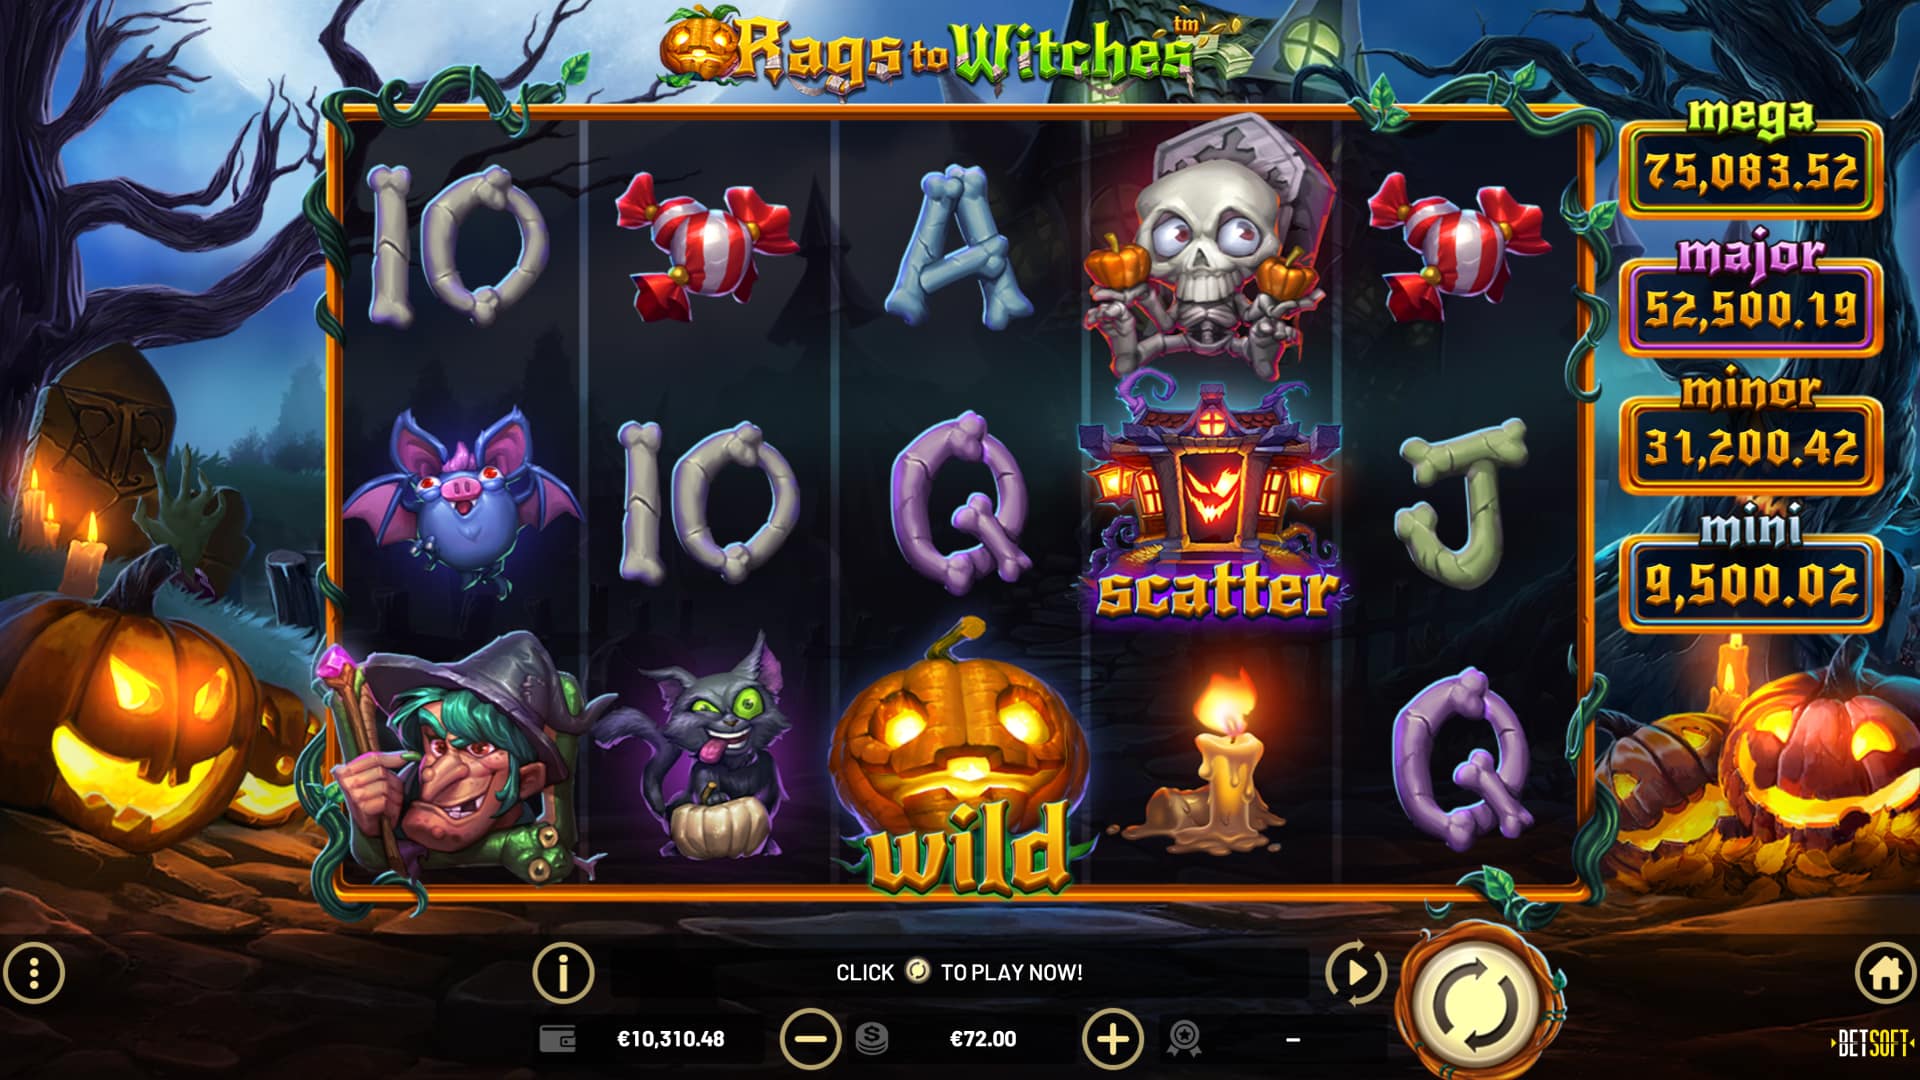 rags to witch slot